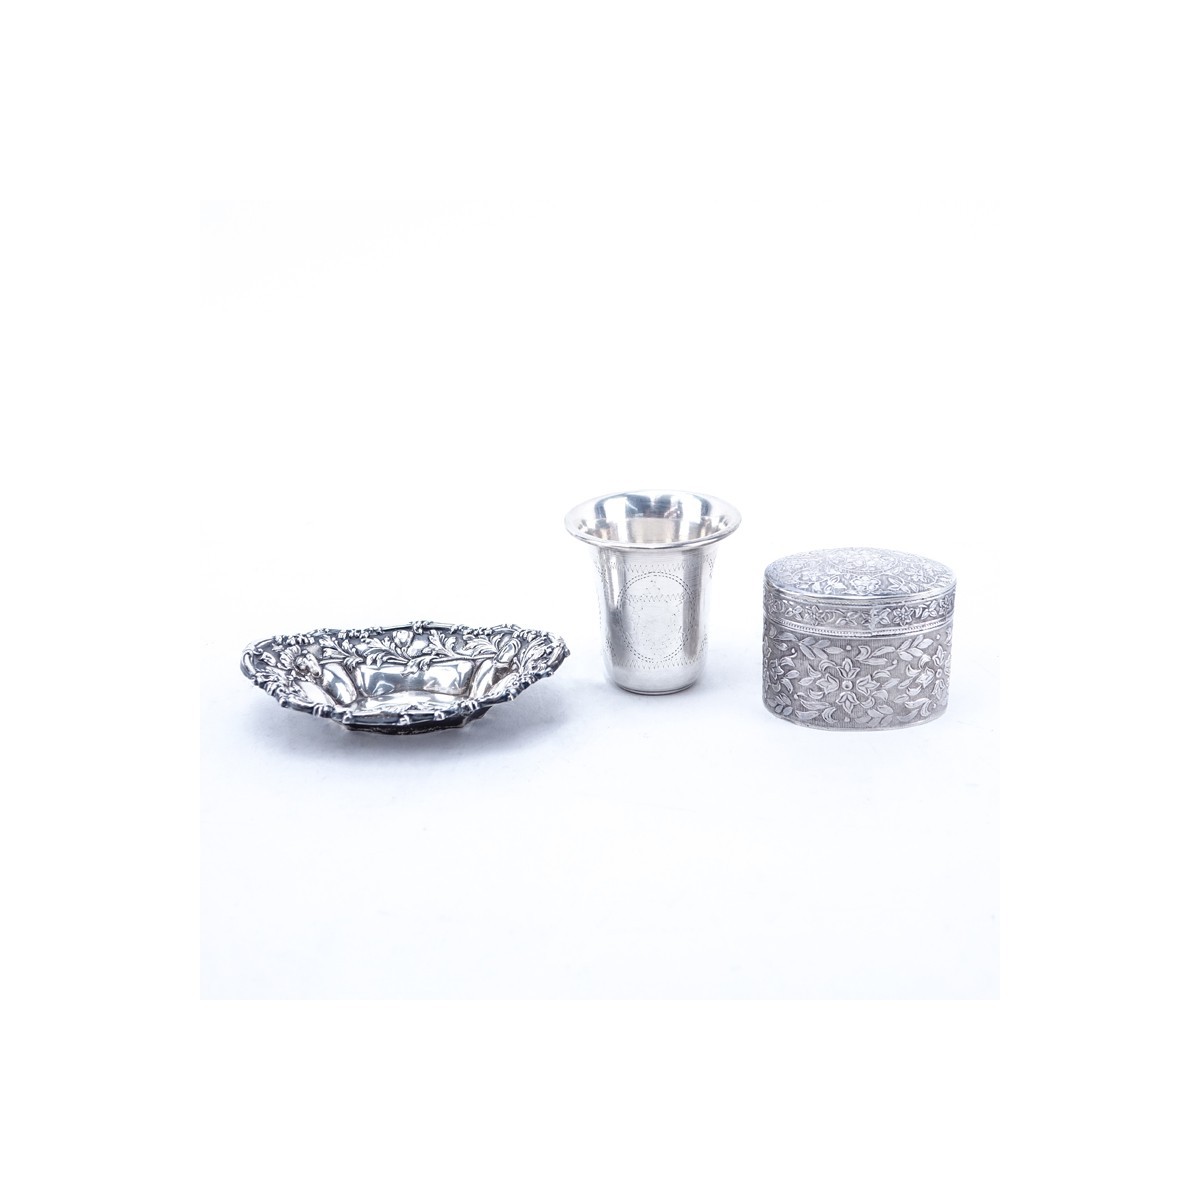 Group of Six (6): Three Sterling Silver Kiddush 2-1/4" H, Two Repousse Sterling Silver Nut Dishes 4" W, and 800 Silver Repousse Covered Box 2" H. All appropriately stamped.